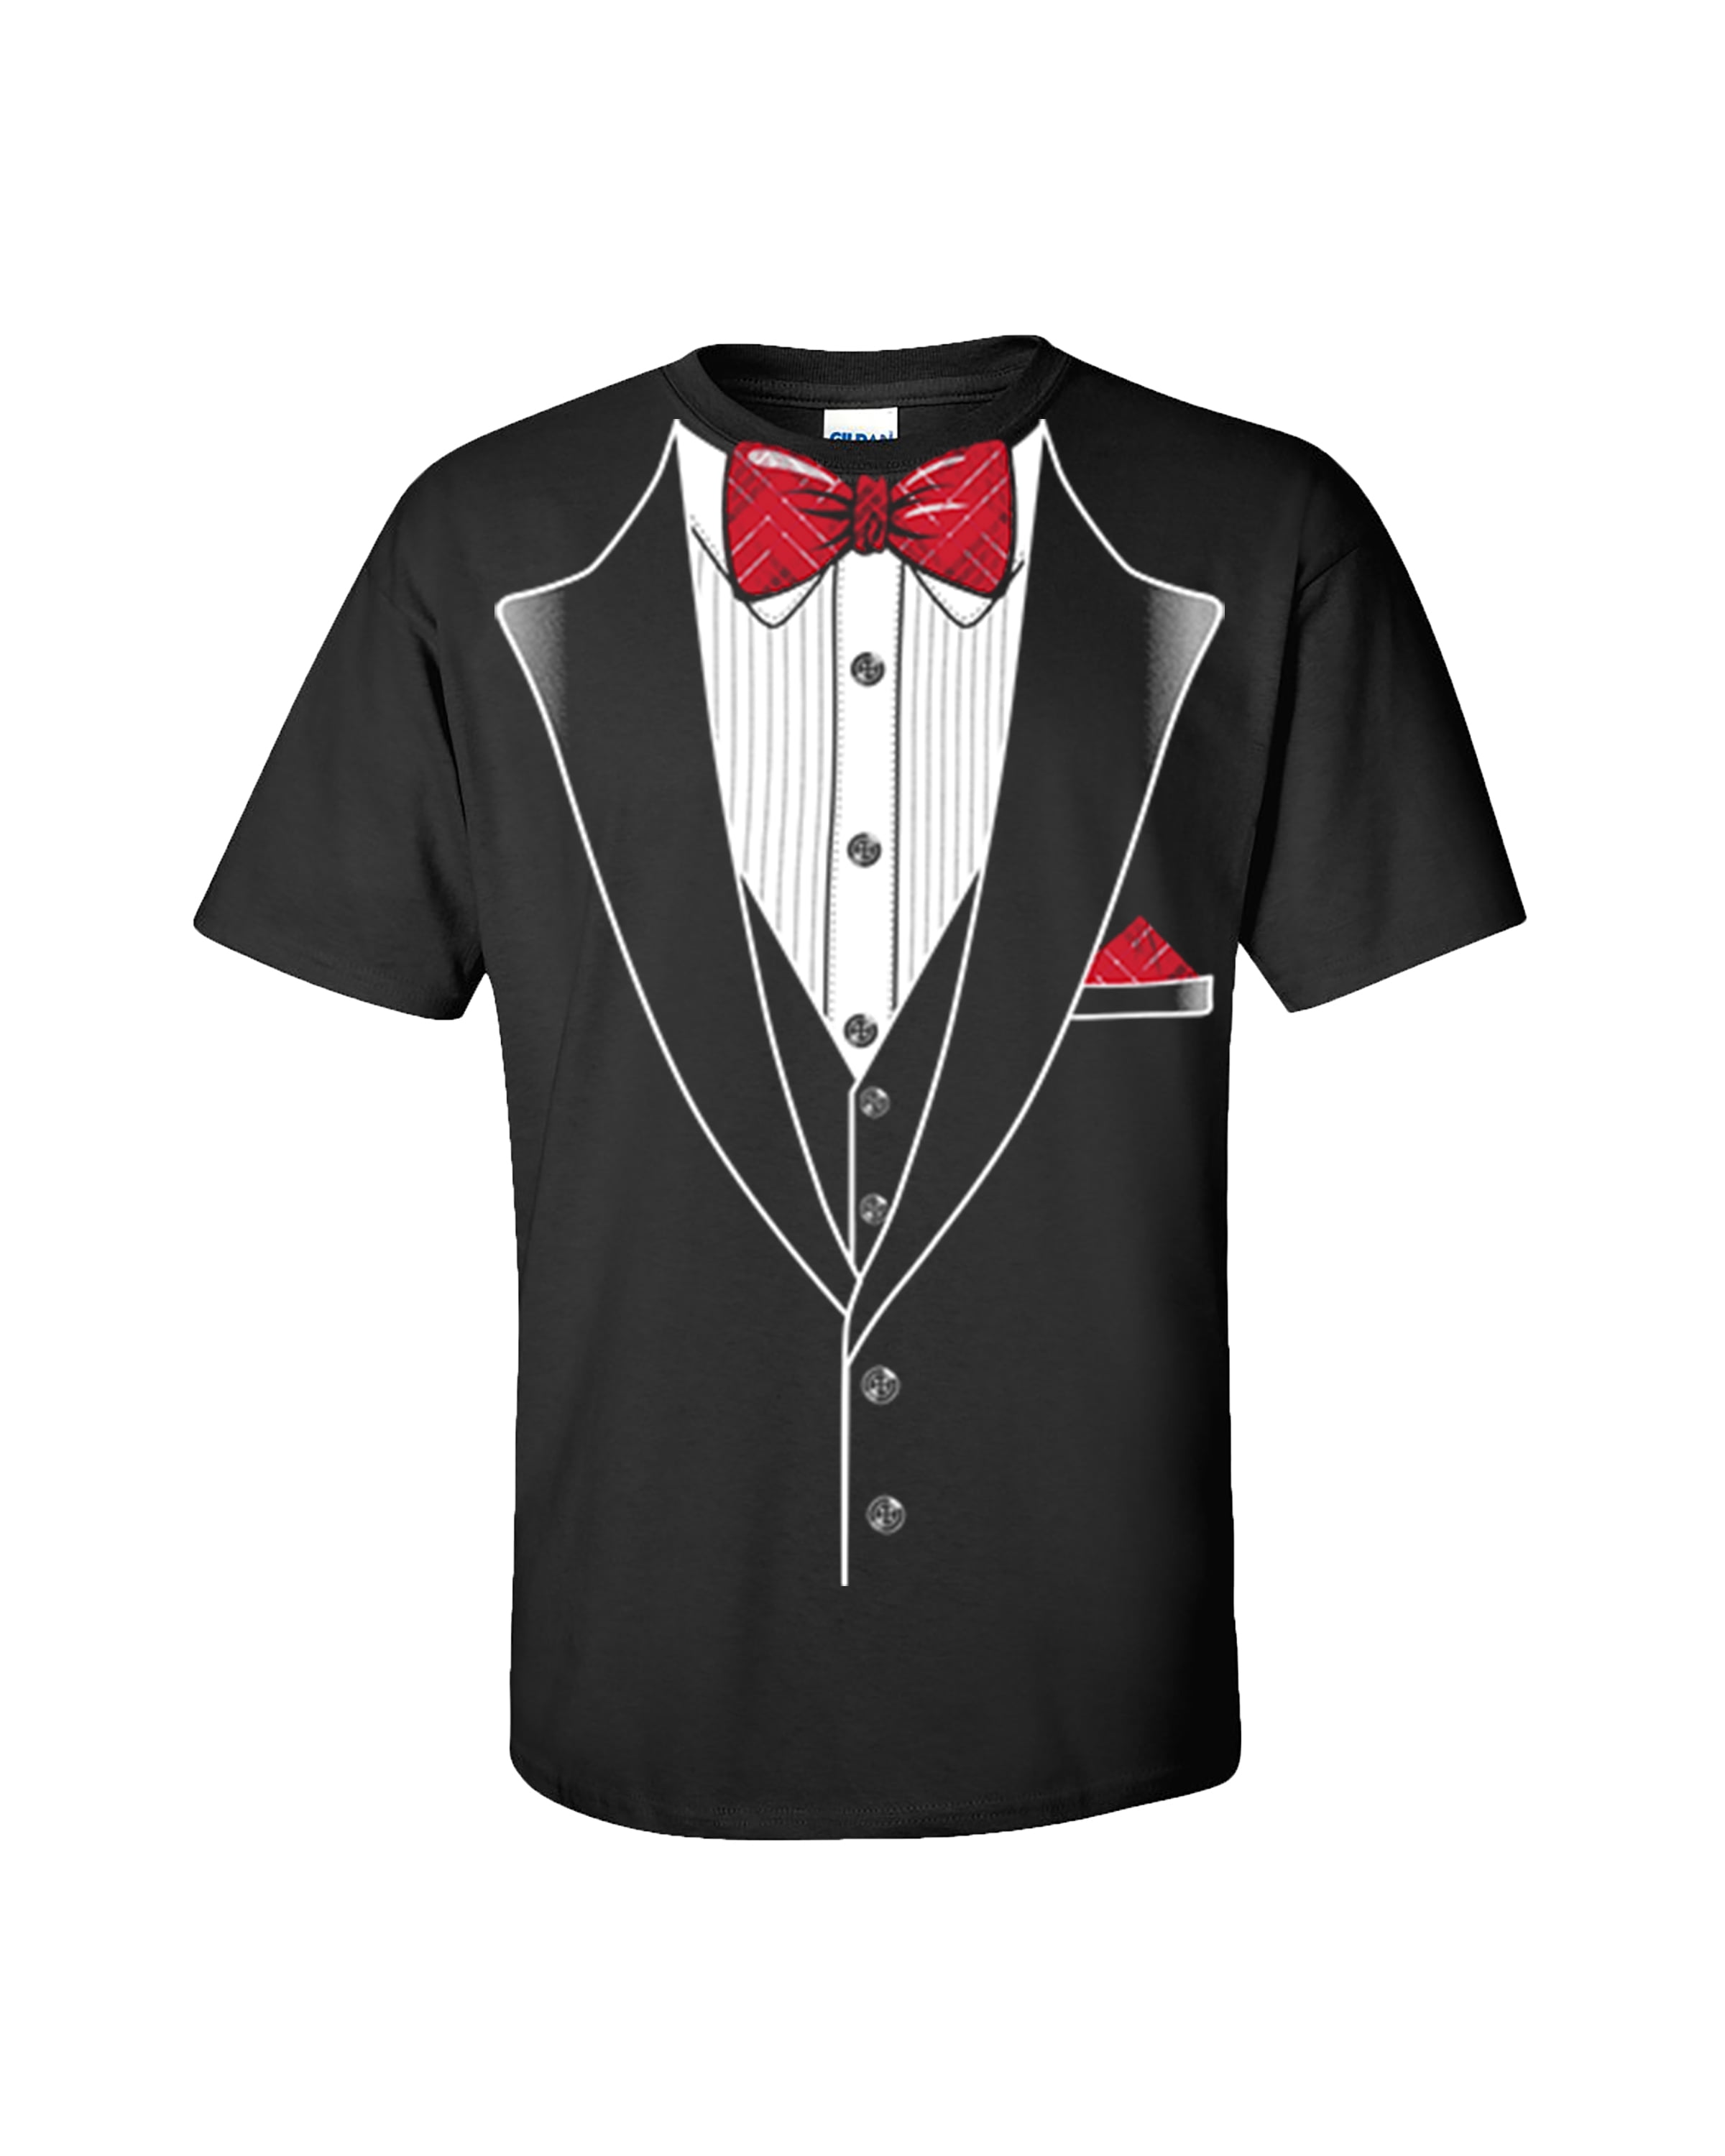 Tuxedo T-shirt Classy Tux with Red Plaid Bow Tie 